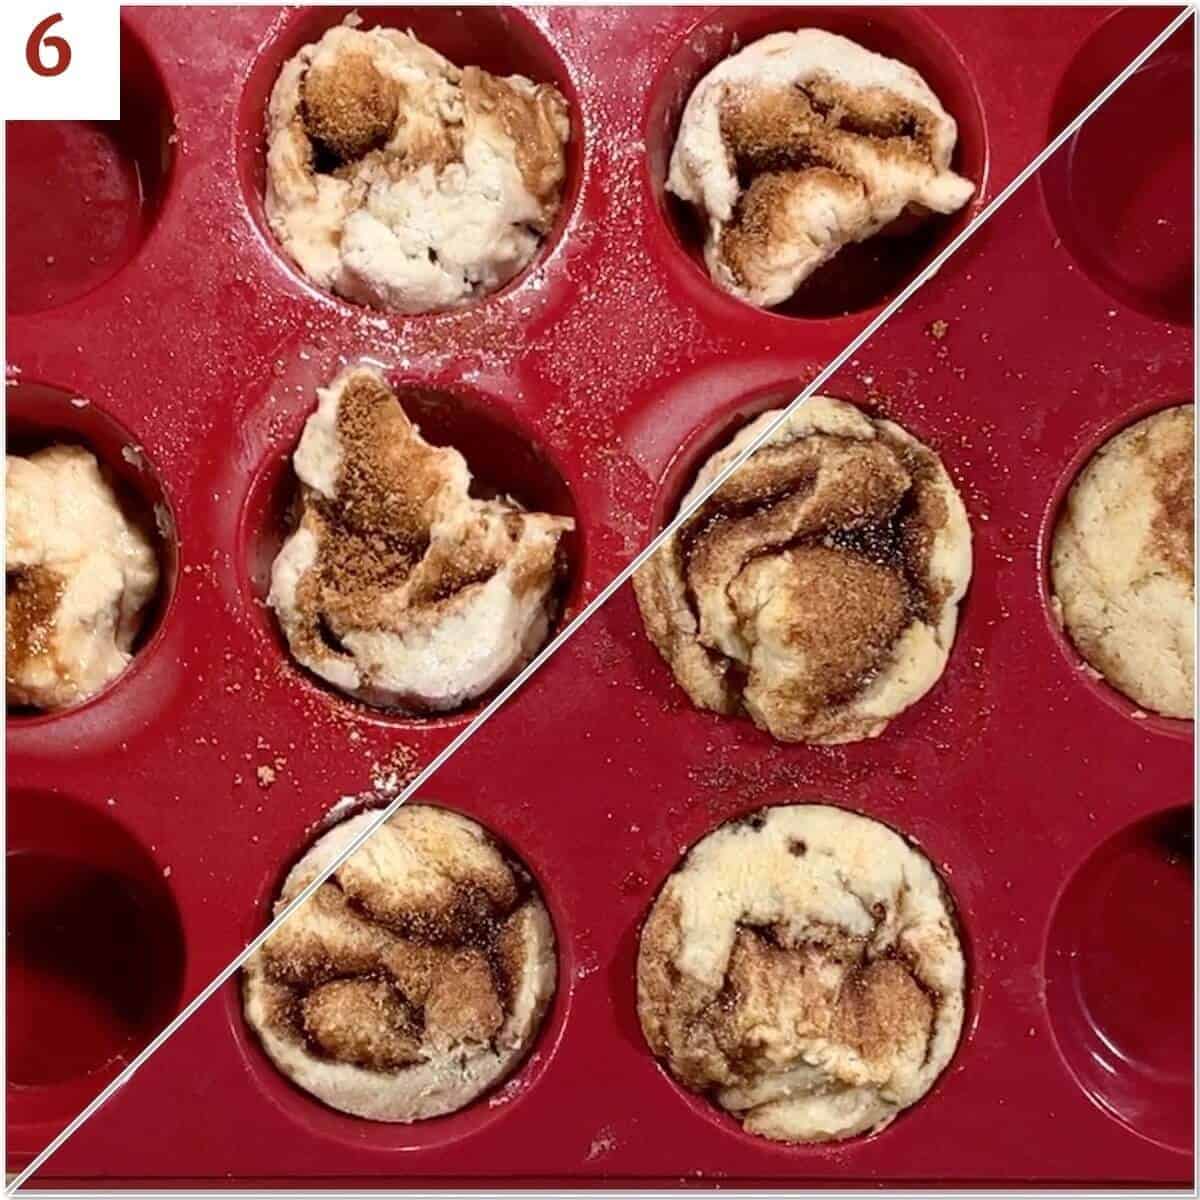 Collage of Cinnamon Rolls before & after baking.